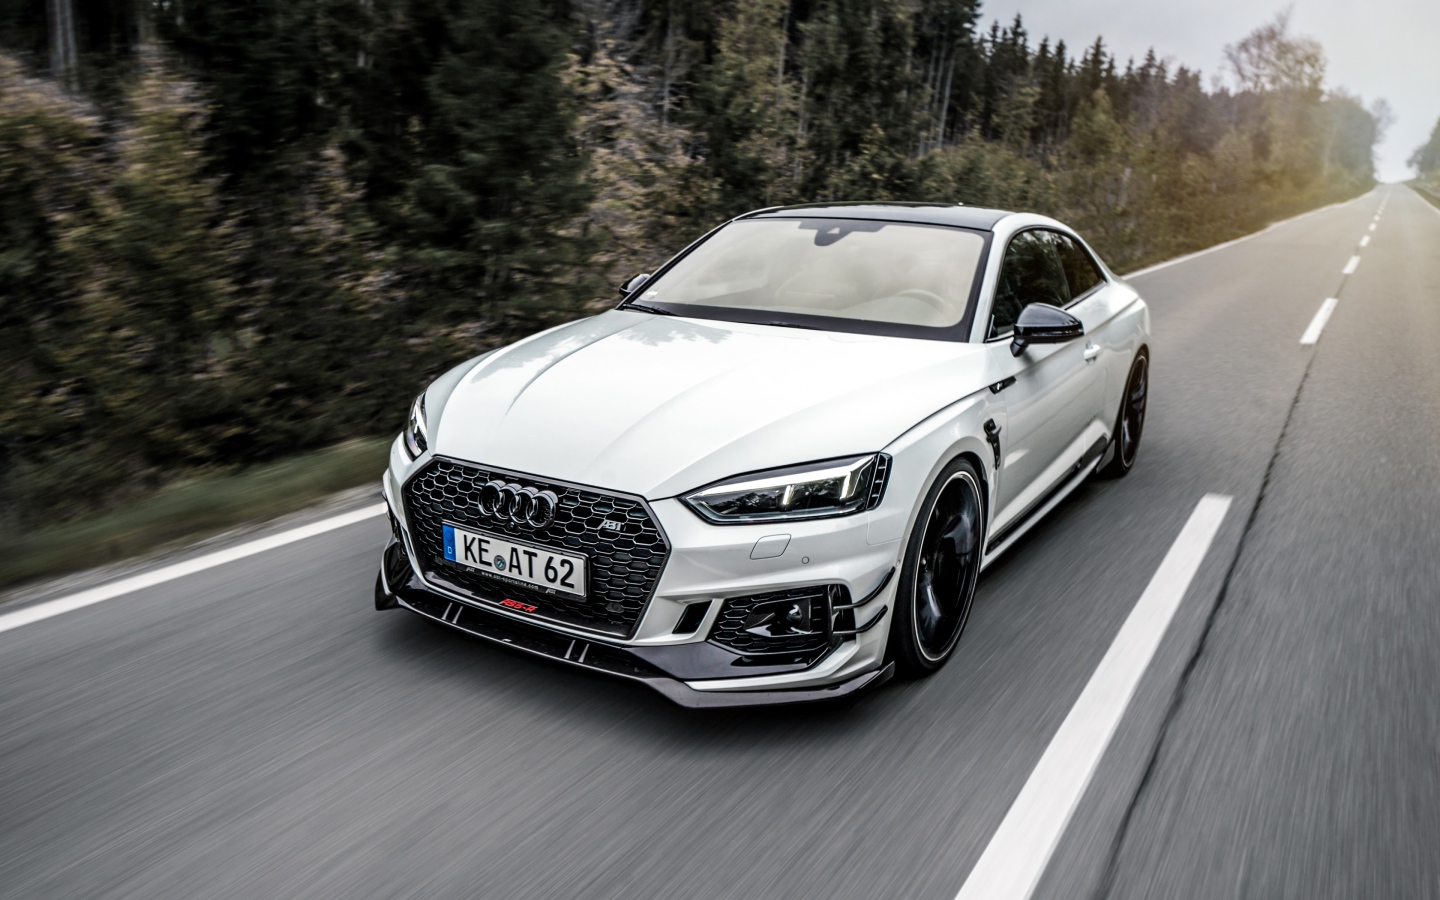 White car Audi RS5 2018 on the road near the forest